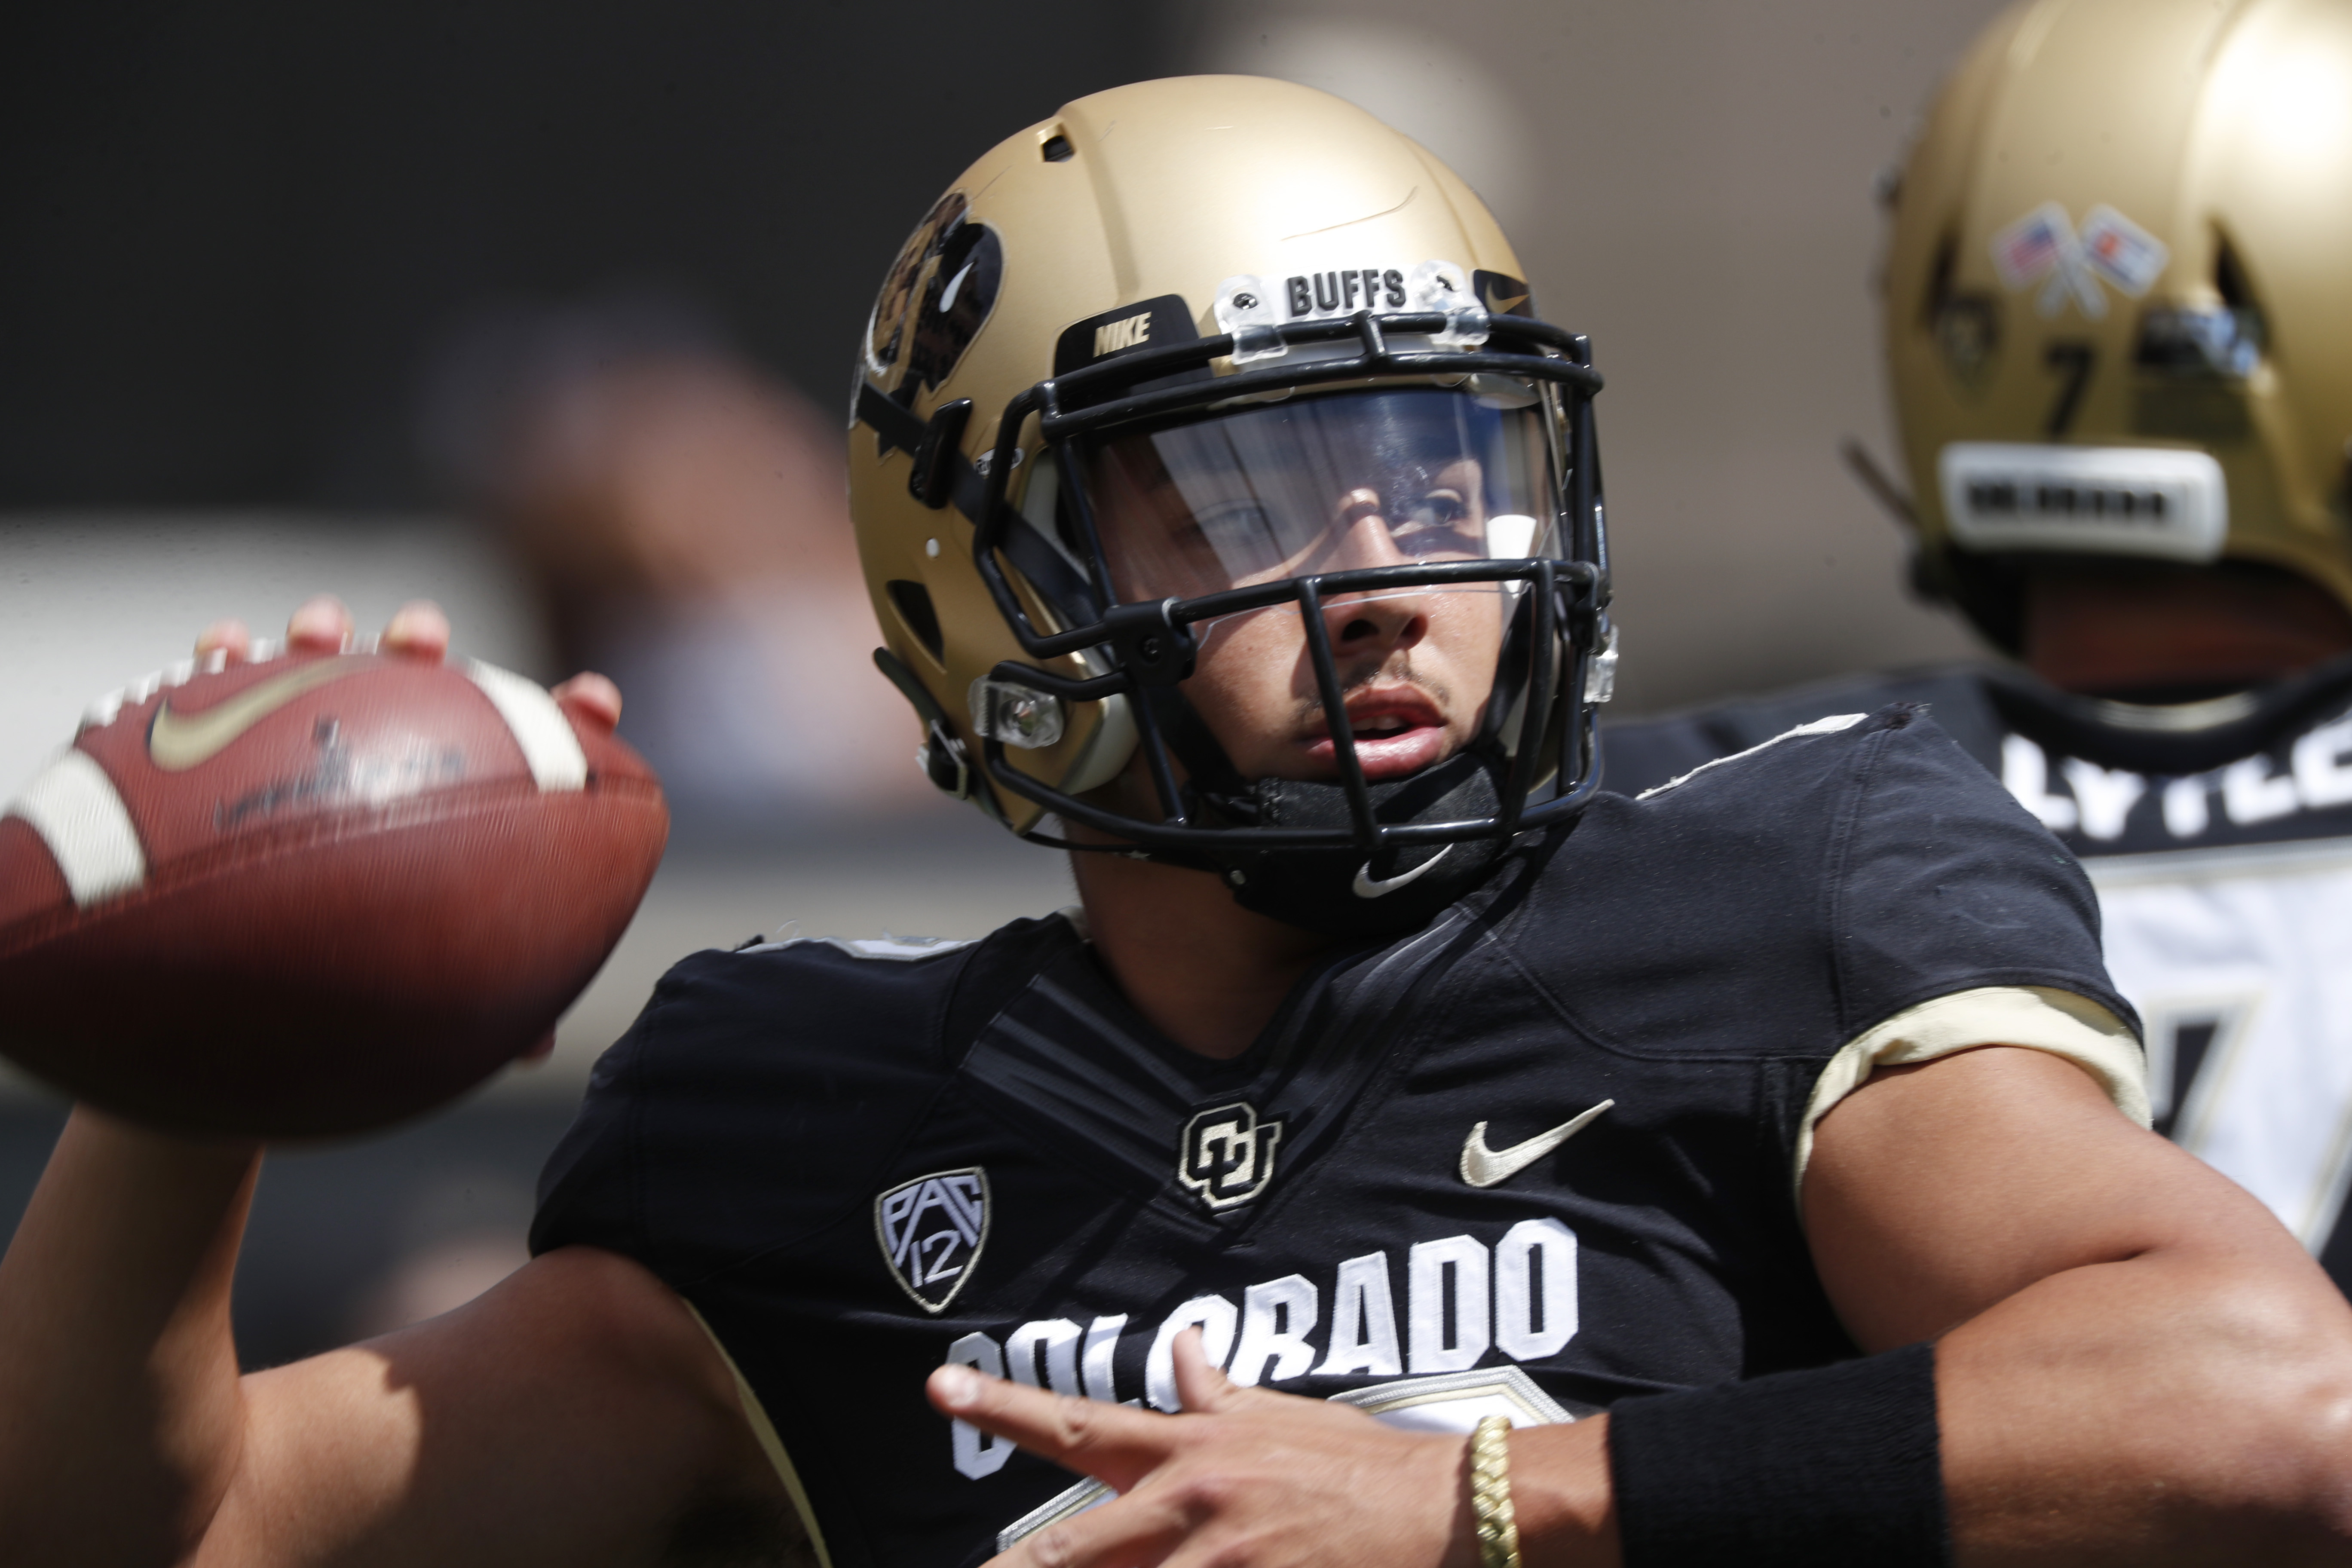 Montez leads way as Colorado renews rivalry with Air Force